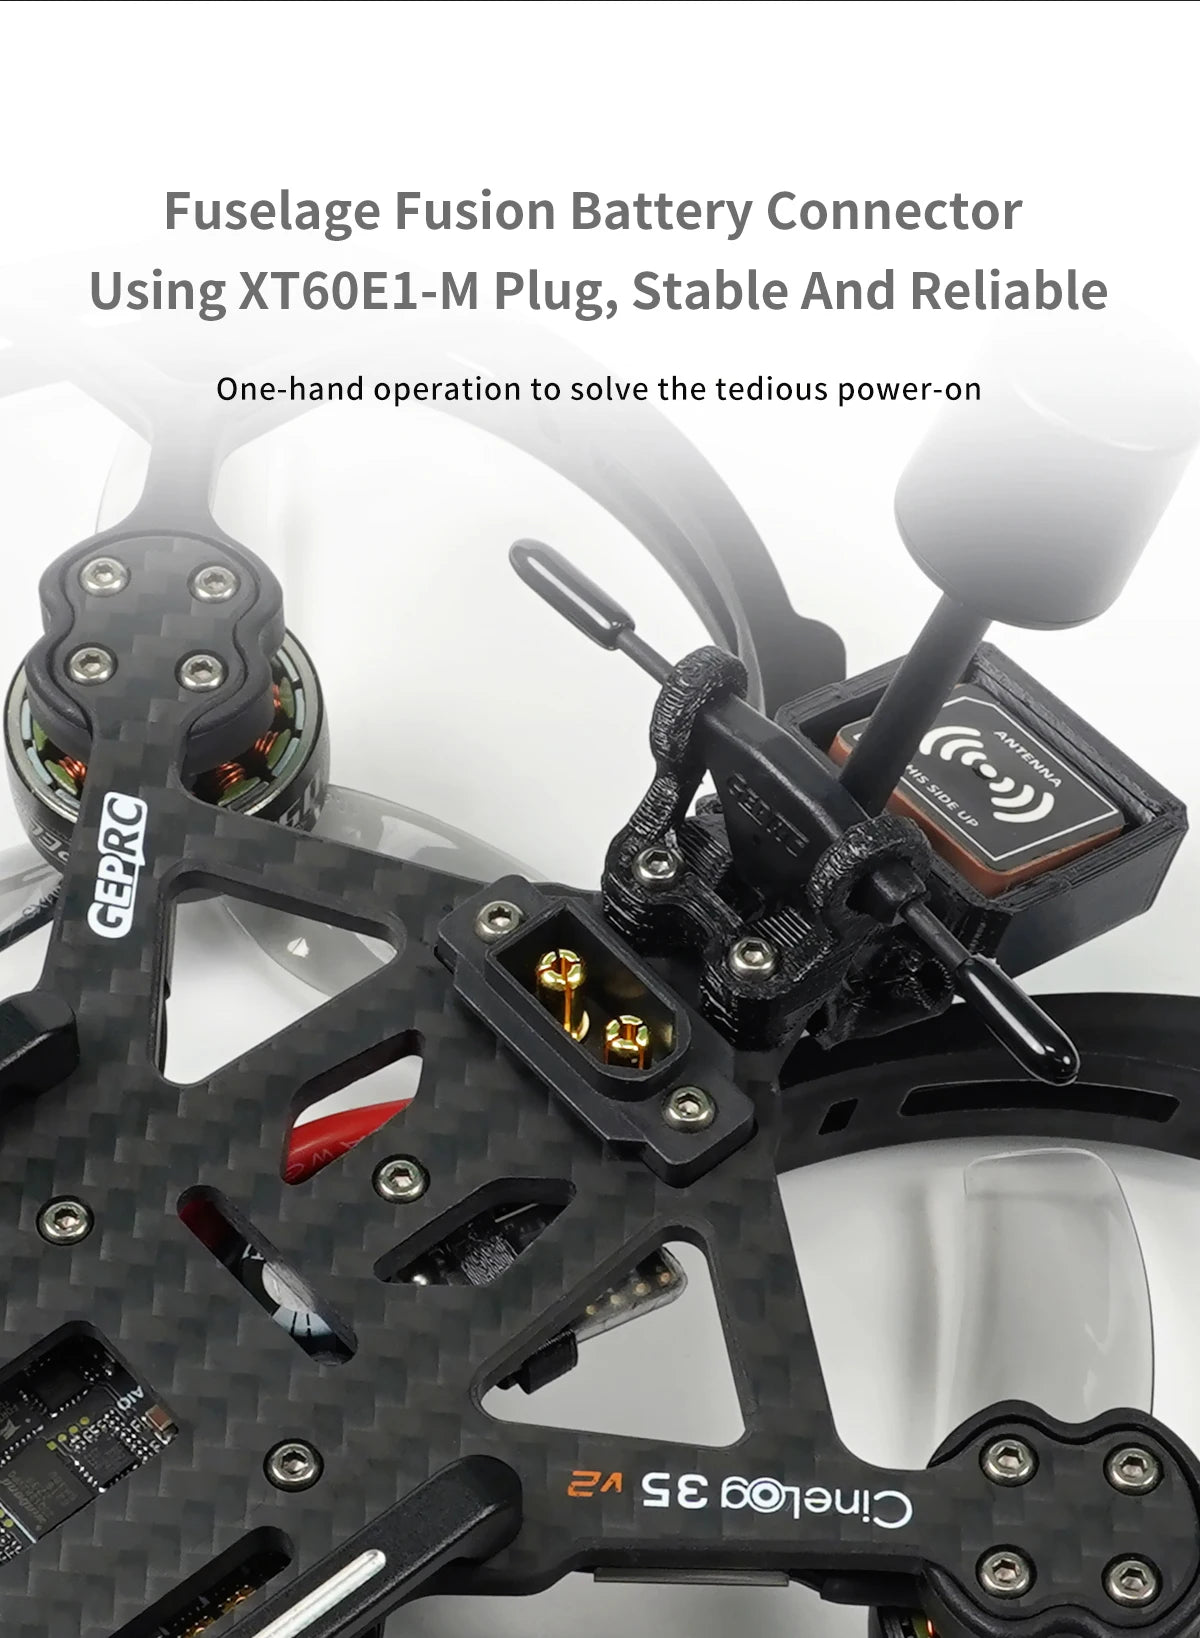 GEPRC CineLog35 V2 HD - Avatar FPV, GEPRC CineLog35 V2 HD, Fusion Battery Connector Using XTGOE1-M Plug, Stable And Re